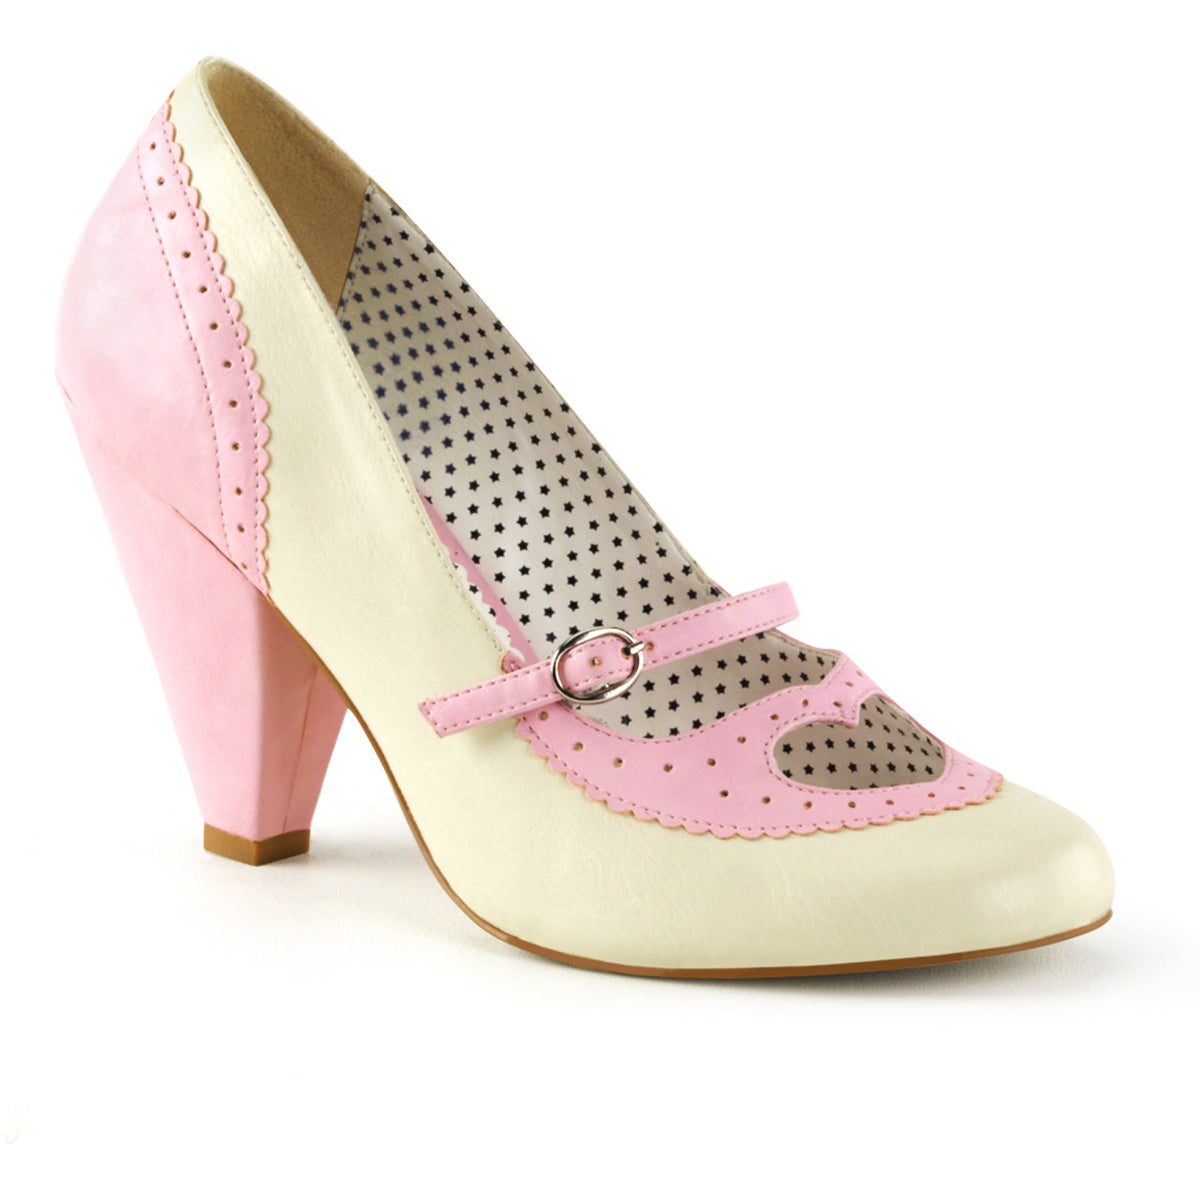 3 3/4" Cone Heel Maryjane Pump B. Pink-Cream Faux Leather Pleaser Pin Up Couture POPPY/18